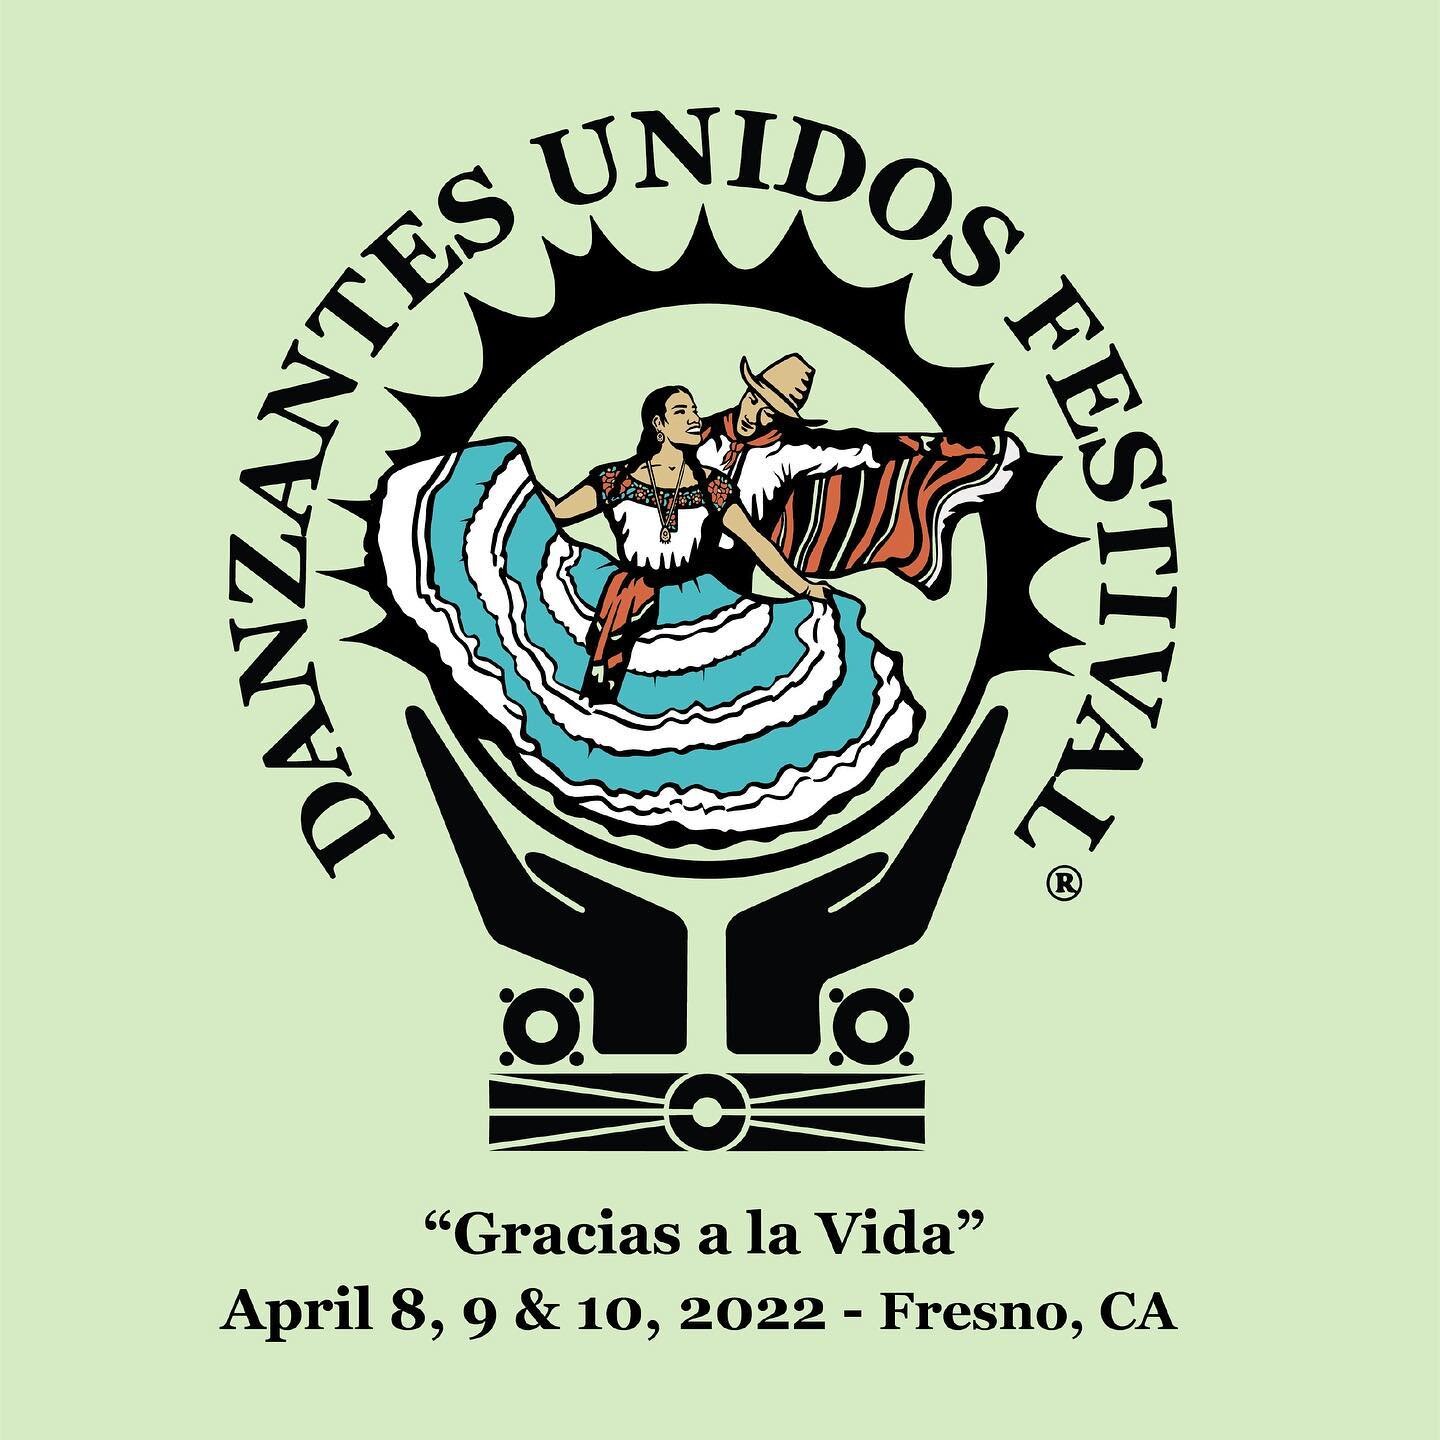 Danzantes Unidos 2022 Festival Art which took place on April 8, 9 and 10, 2022 in Fresno, CA.

#latinoart #latinoartists #graphicdesign #microbranding #graphicart #graphicartist #latinodesigner #art #logodesign #branding #danzantesunidos #festivalsin